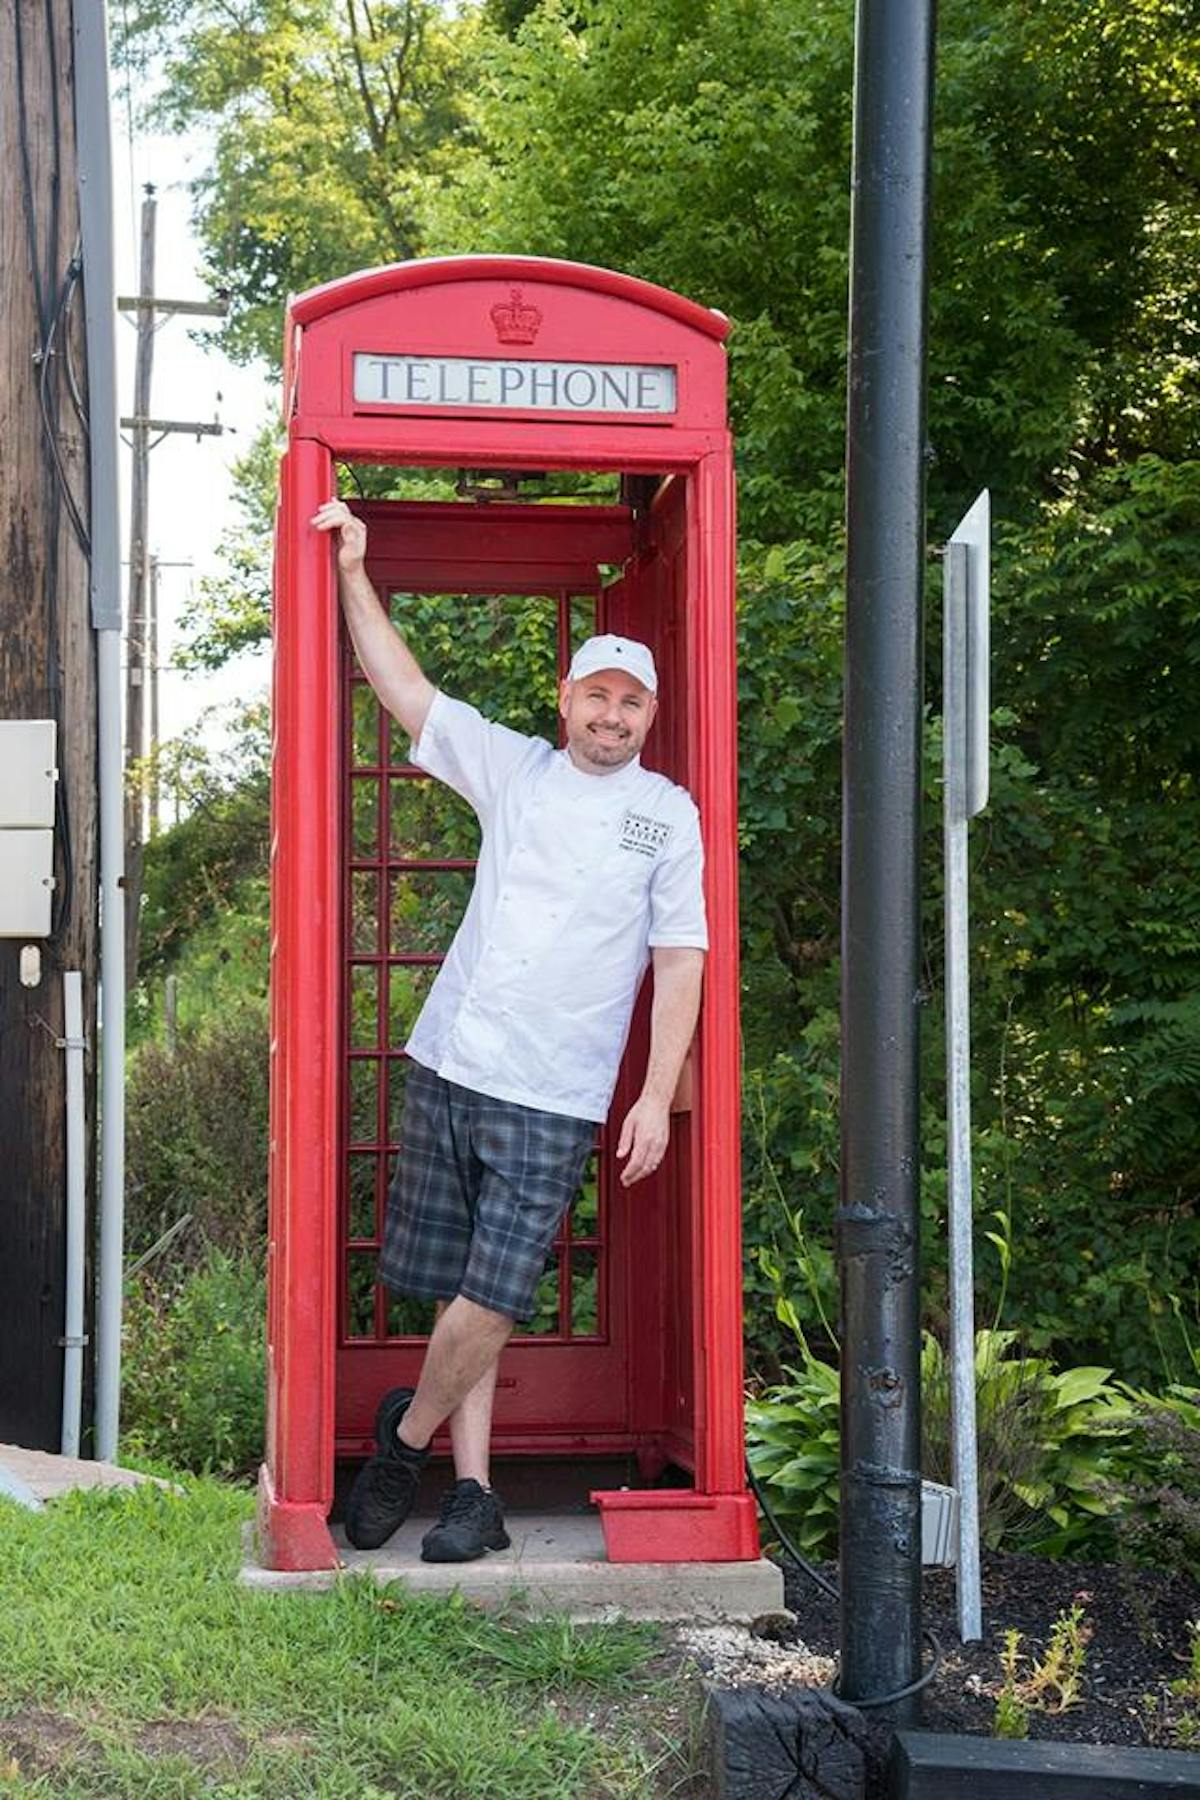 Philip Ferro owner & executive chef in a telephone booth